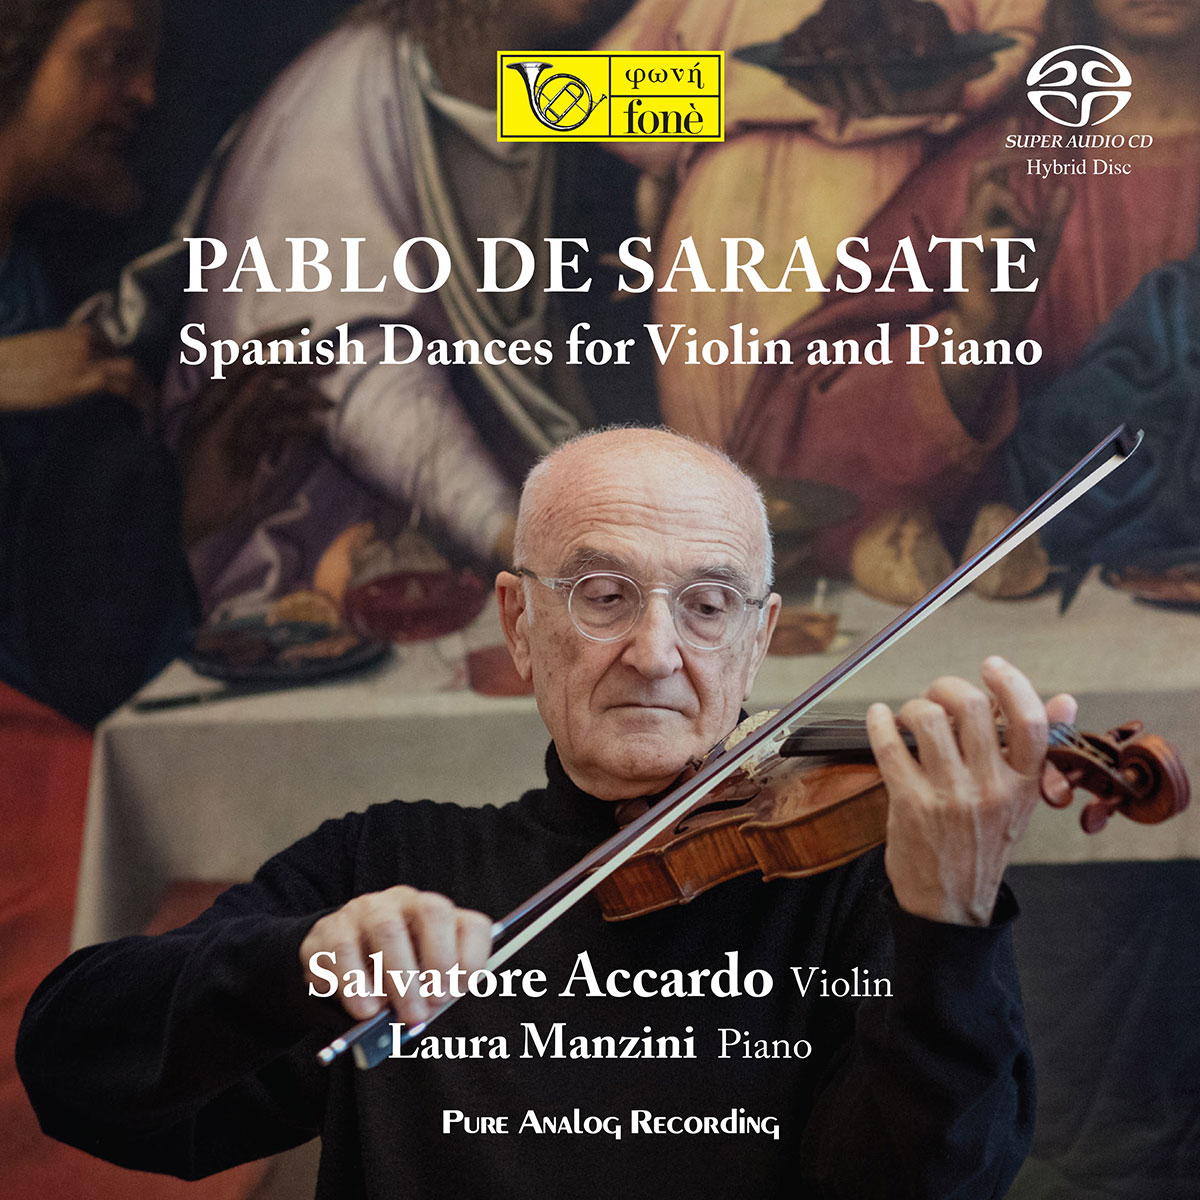 Spanish Dances For Violin And Piano